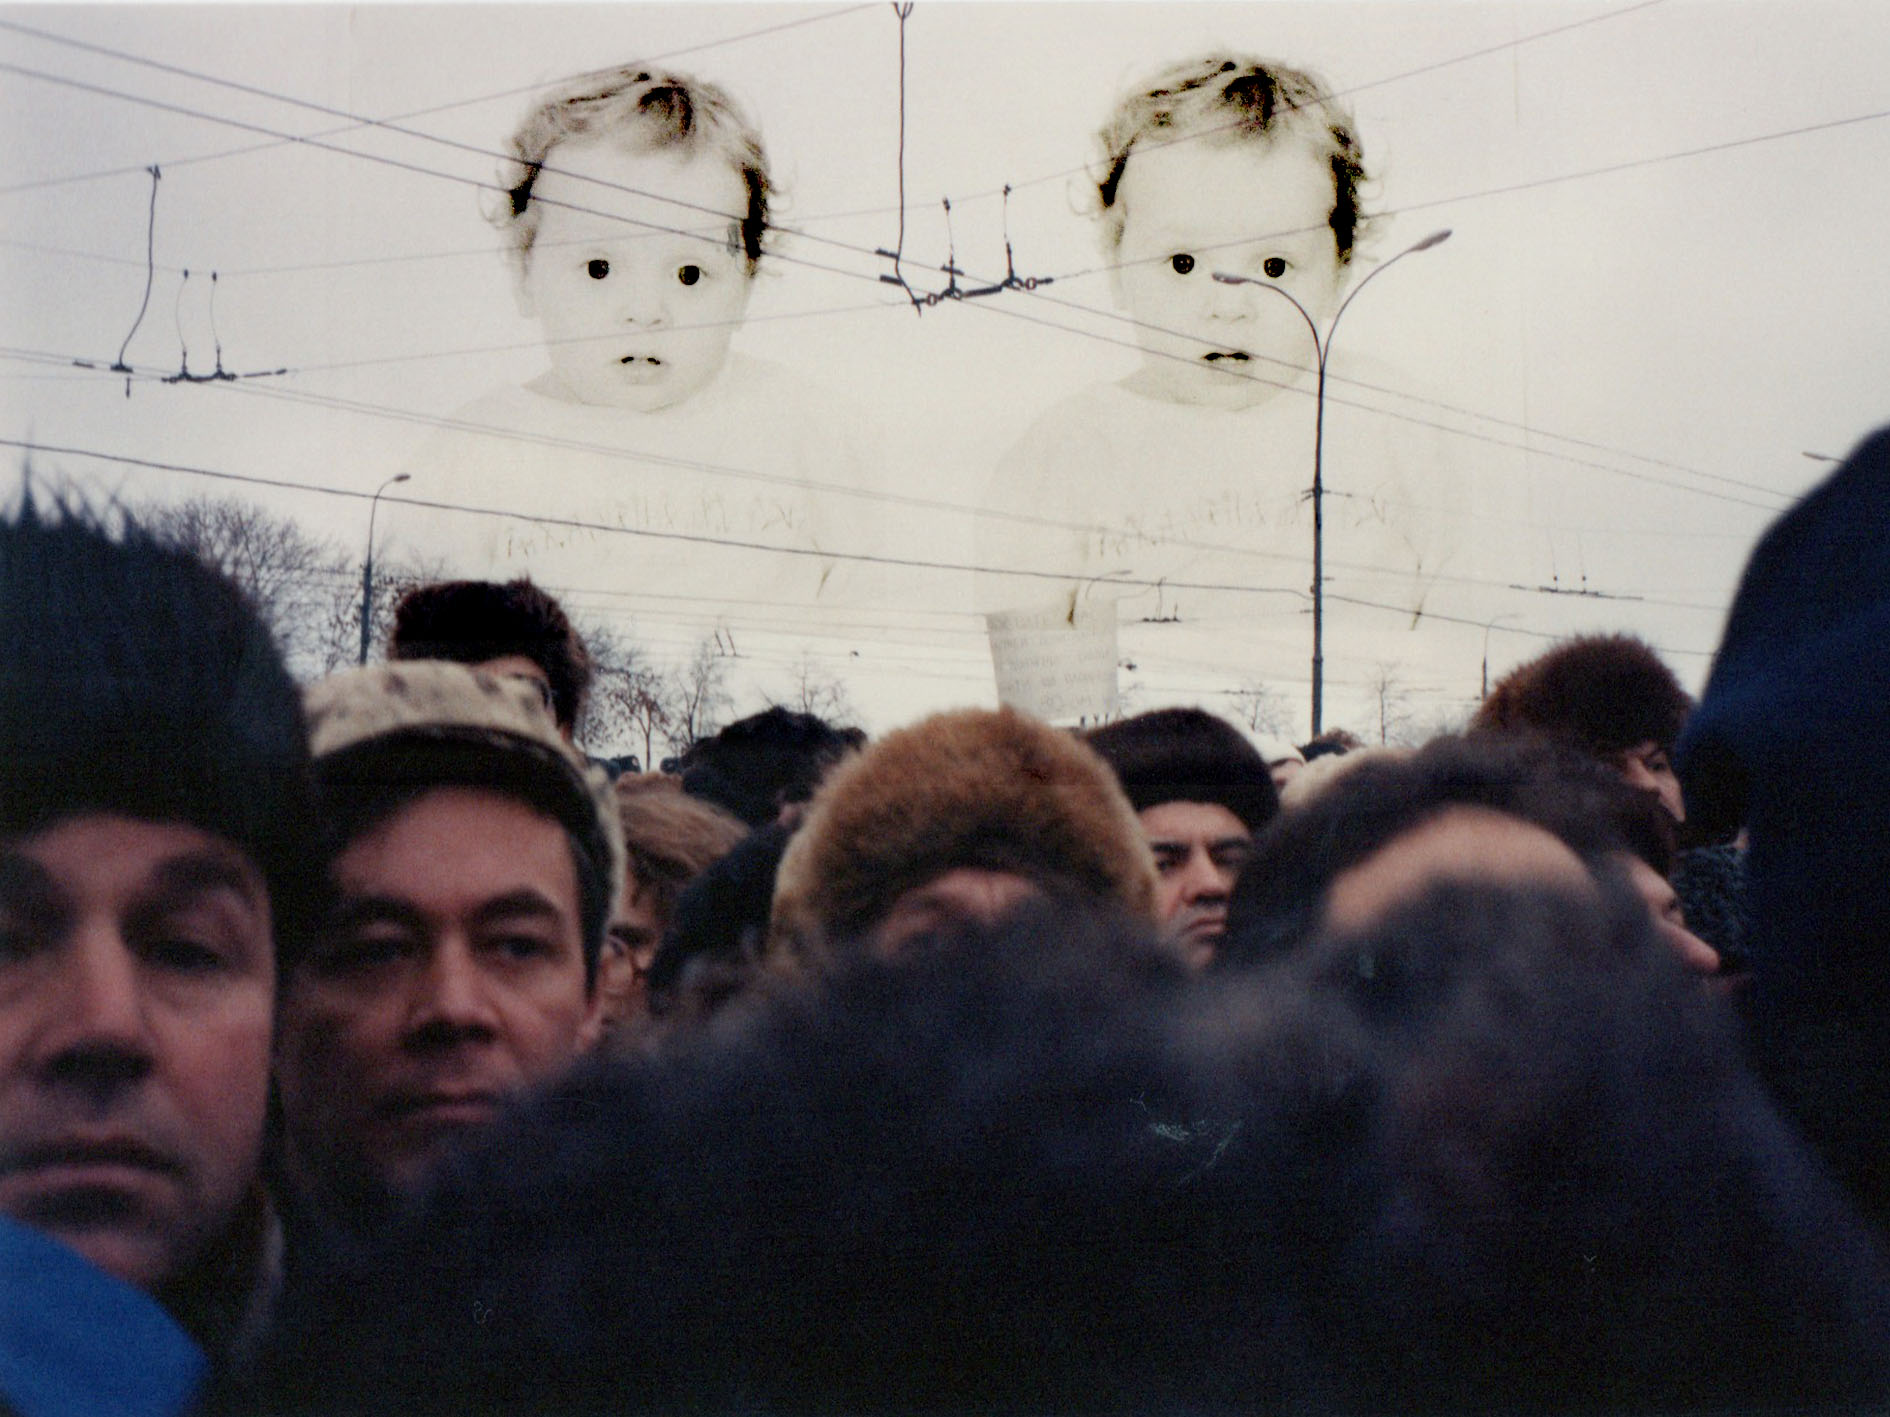 A photoshop collage of a family photo, superimposed over an image of a crowd.